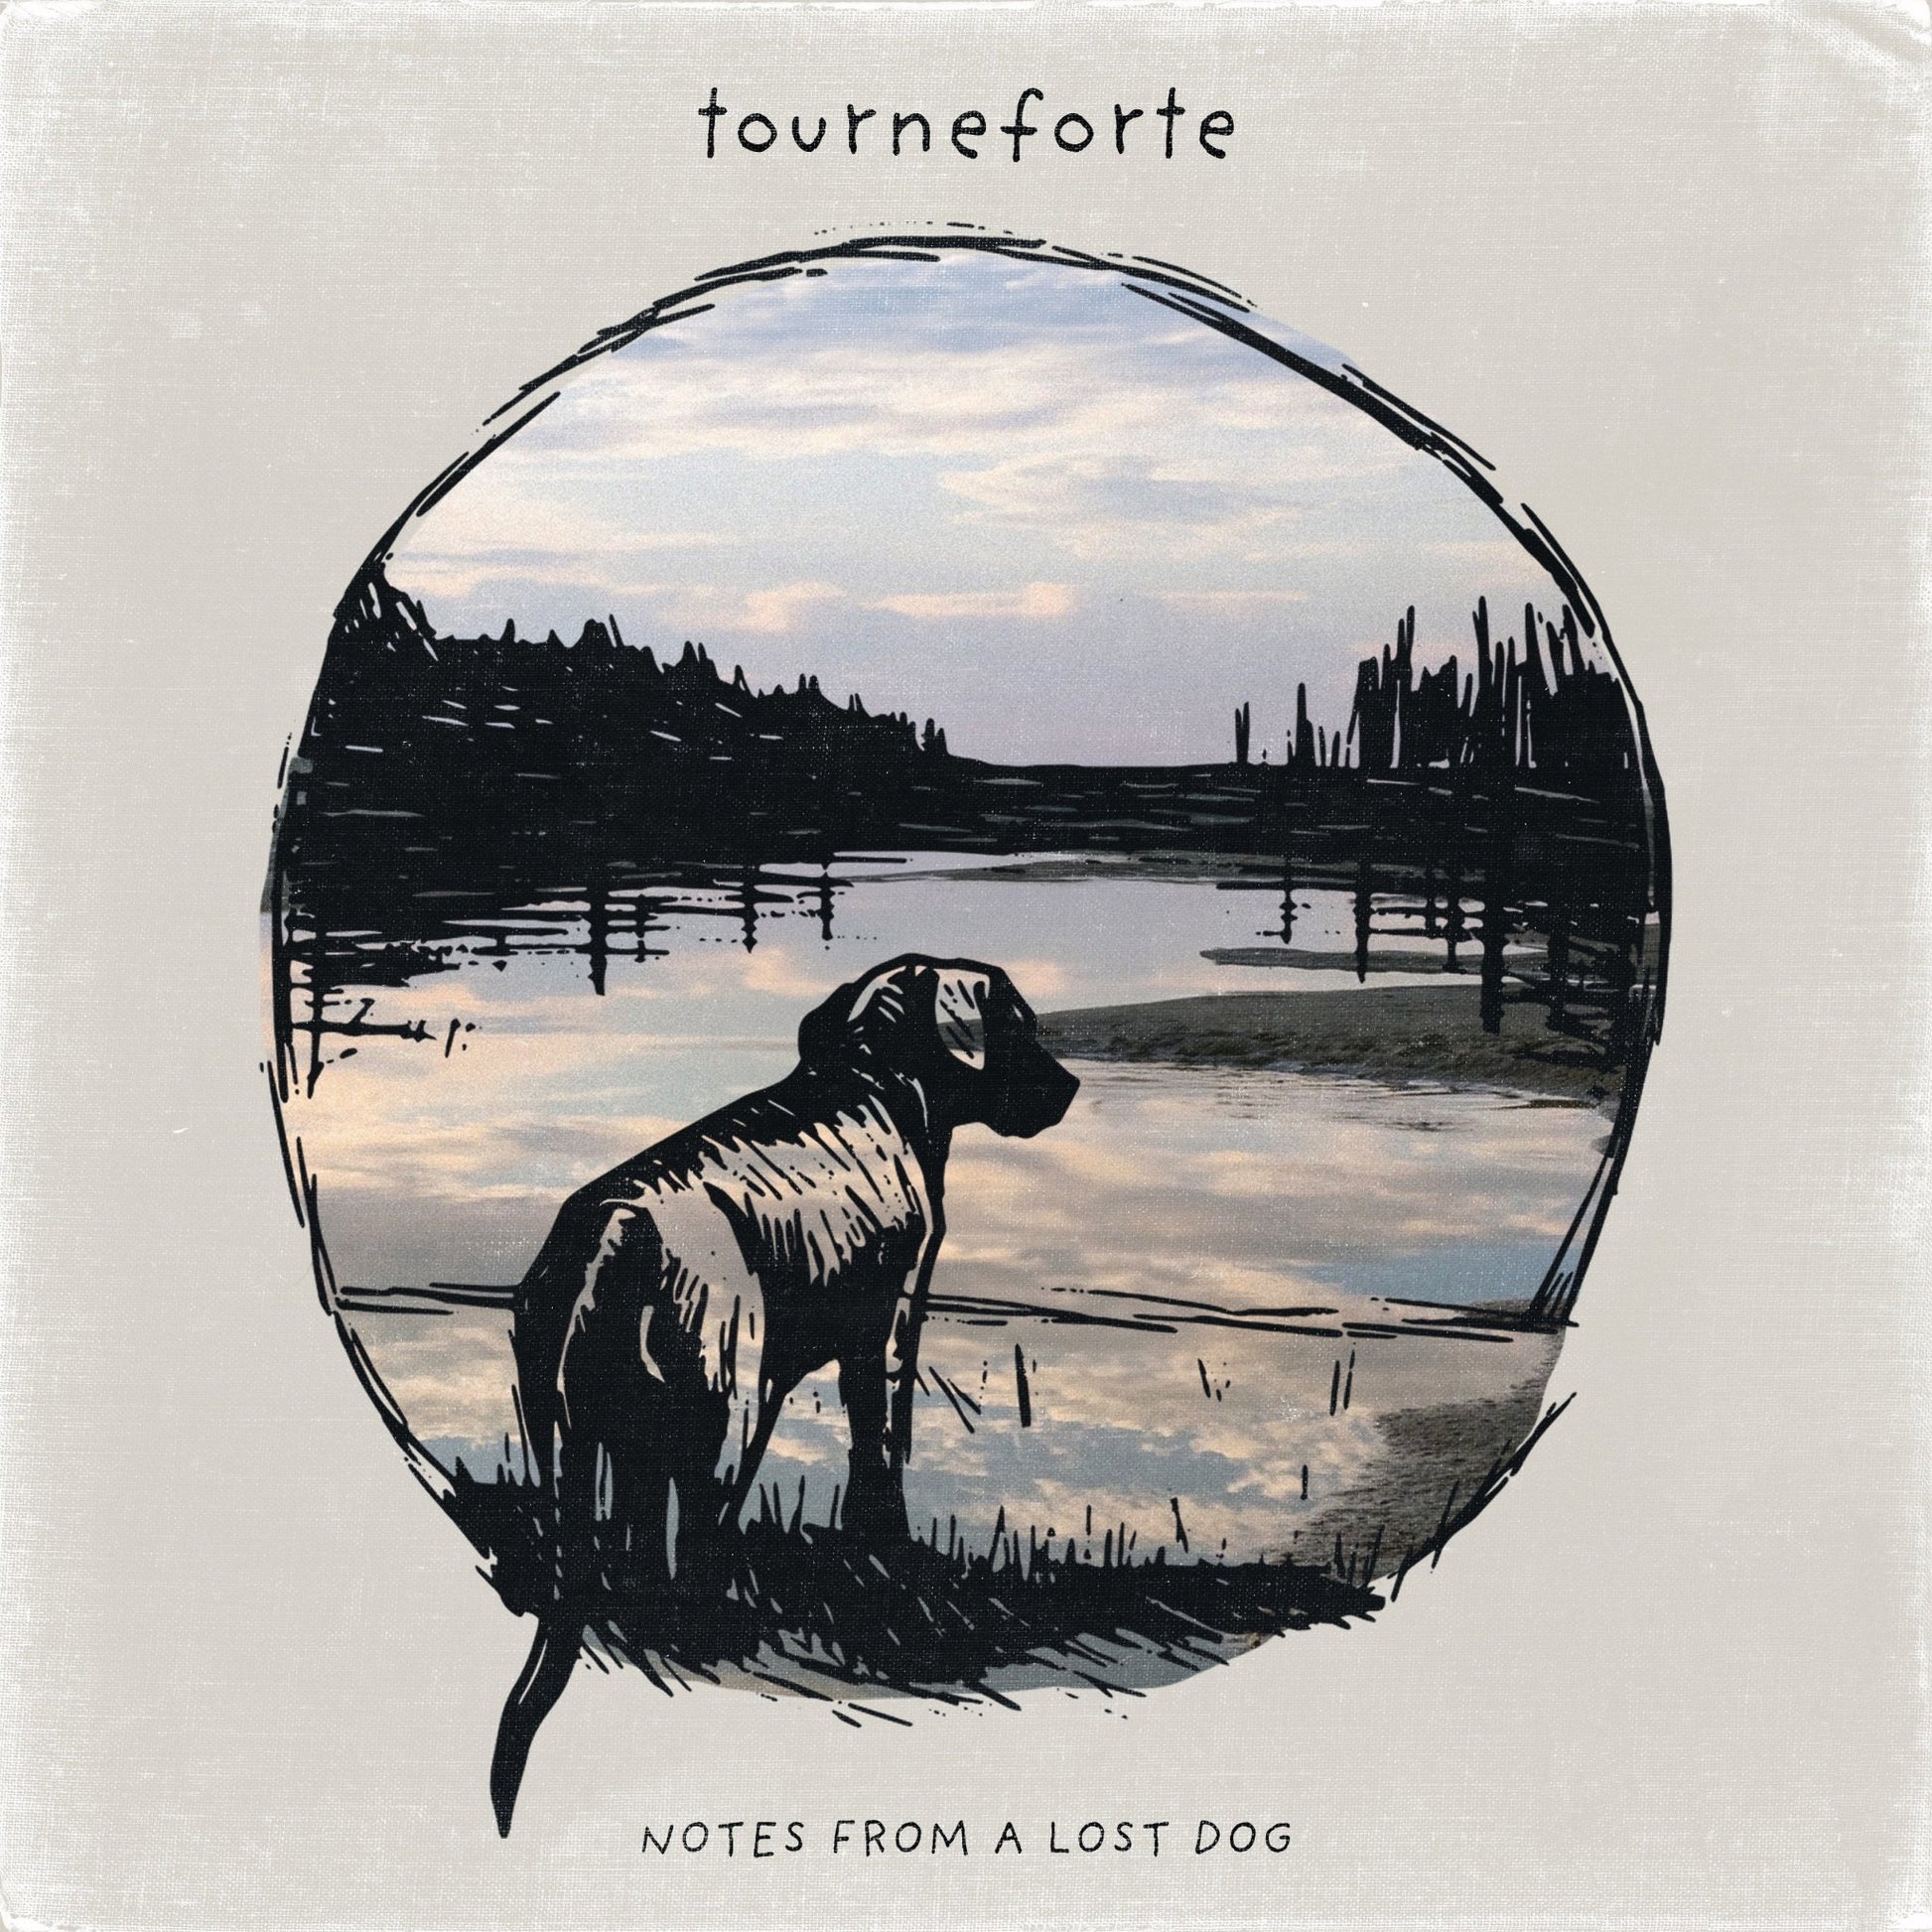 Tourneforte - "Notes From A Lost Dog" - Acrobat Unstable Records